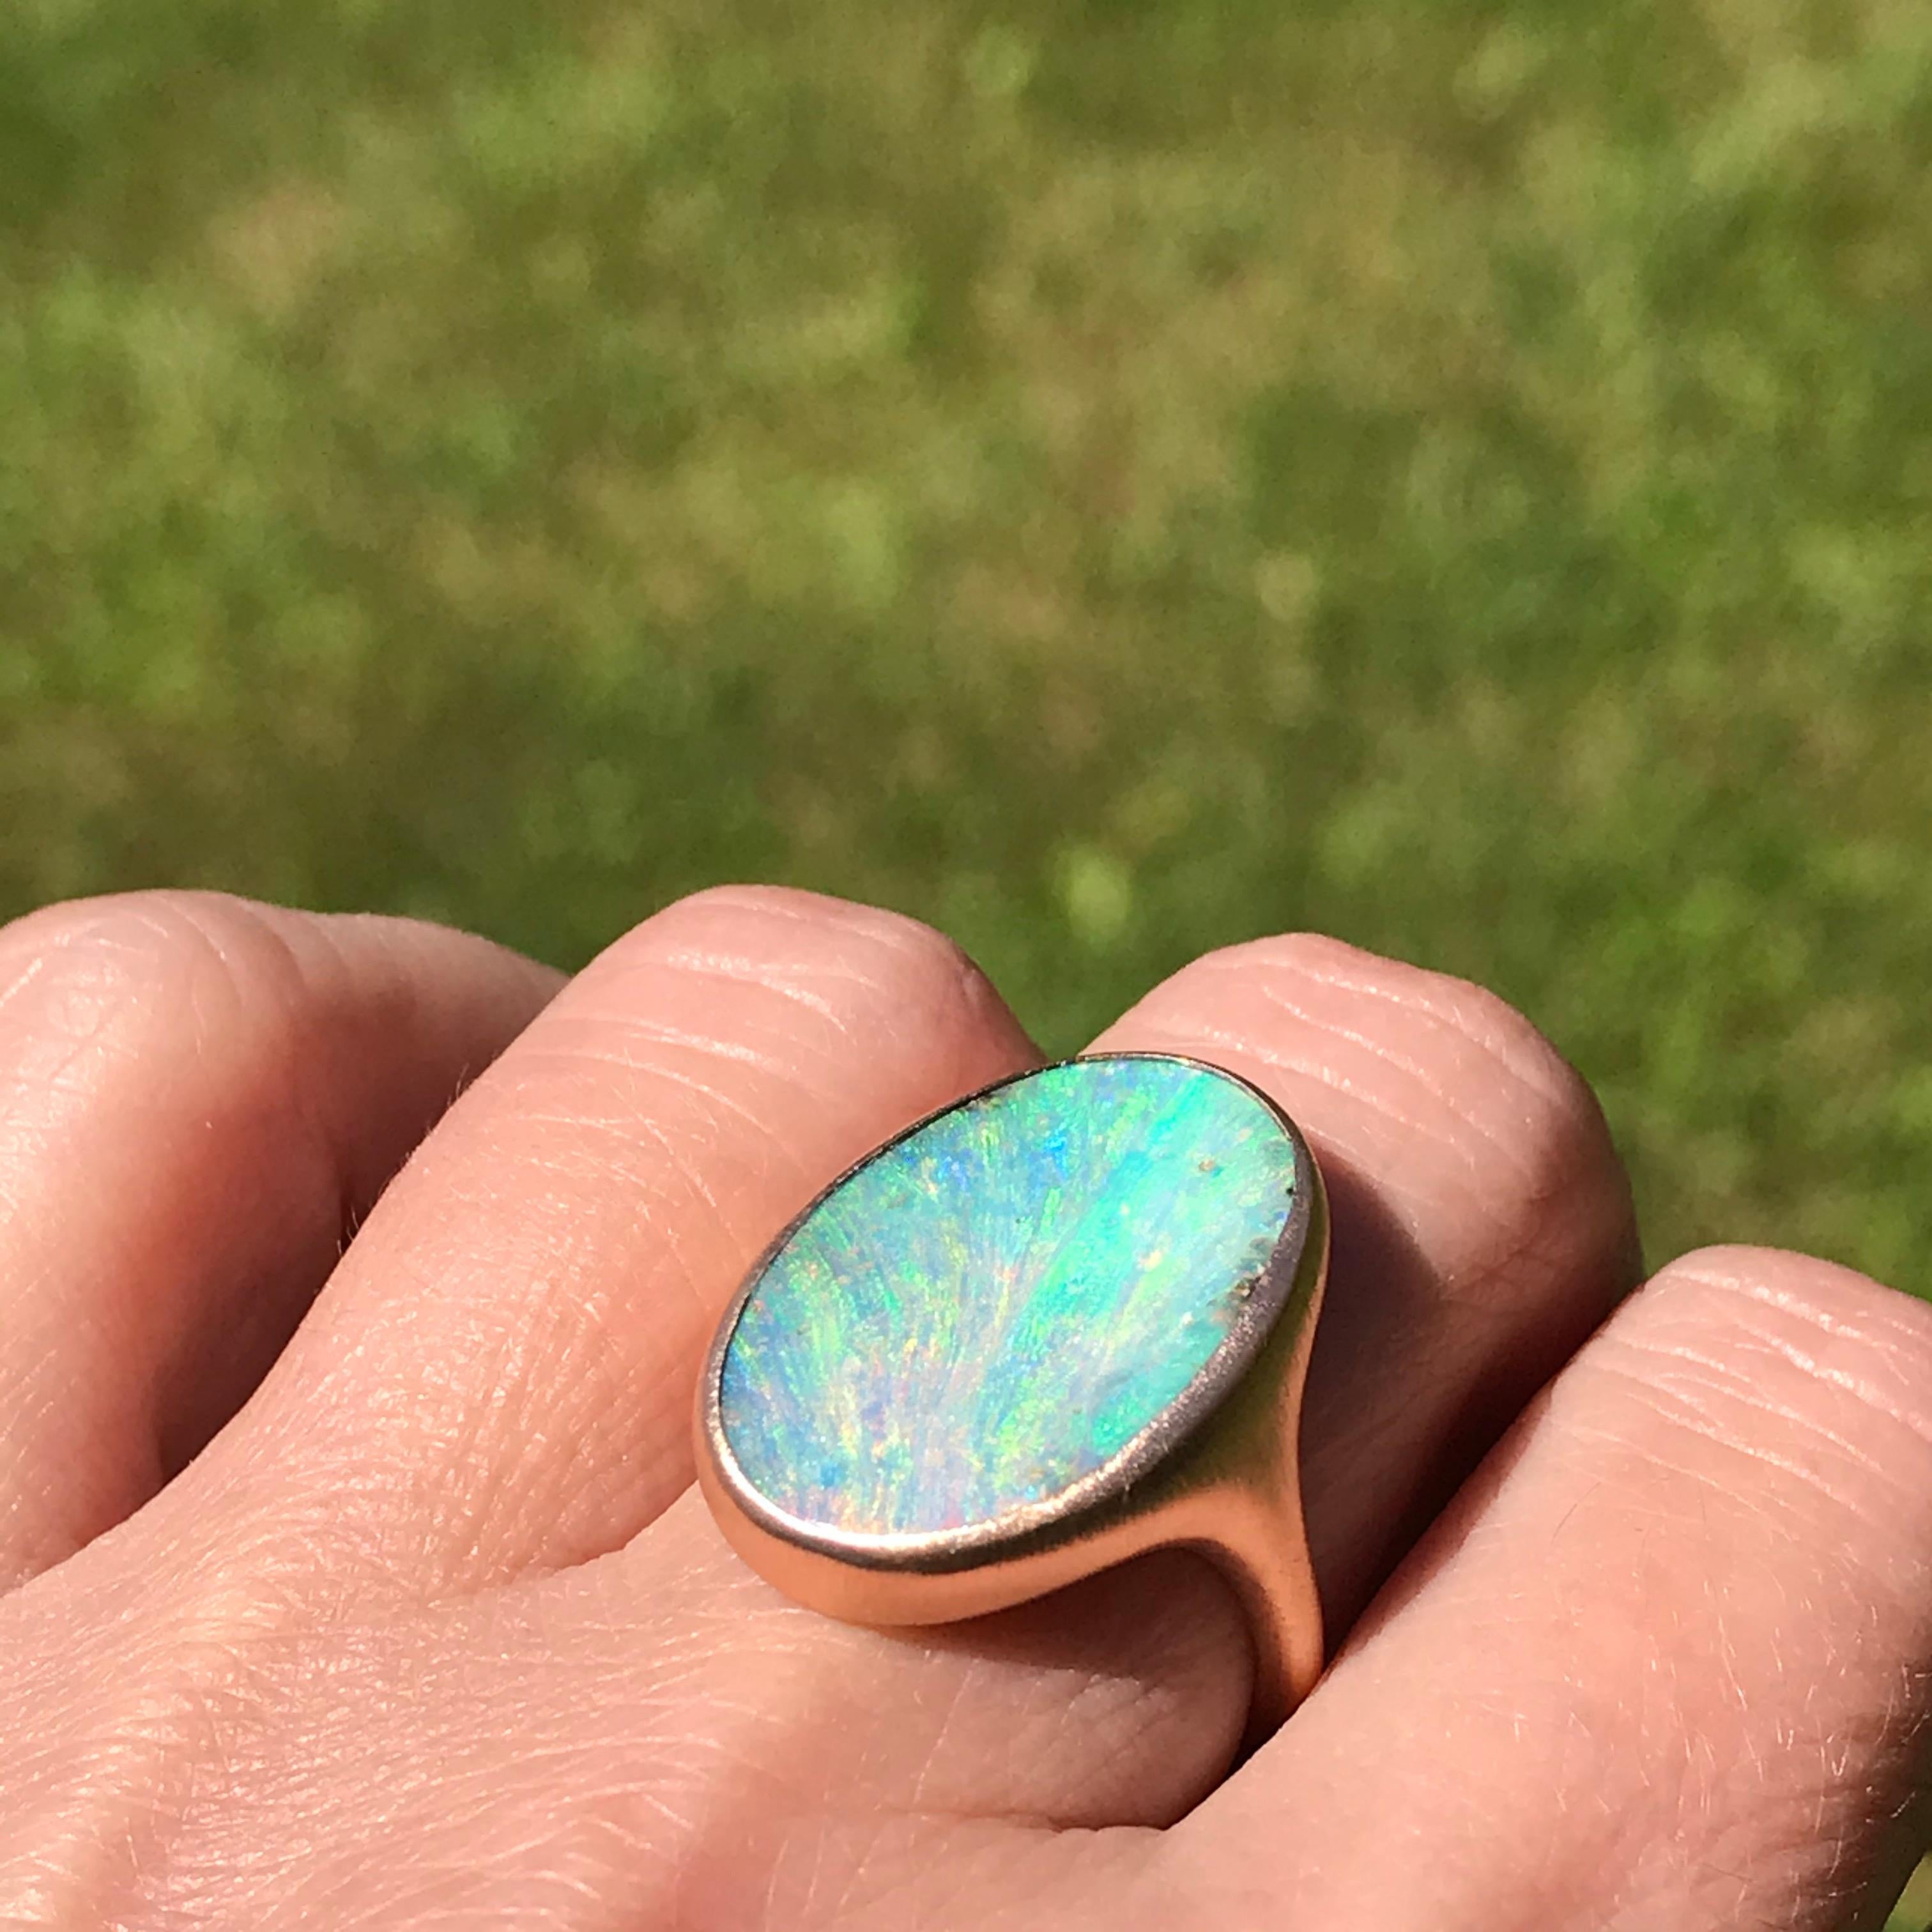 Dalben design 18k rose gold satin finishing ring with a 12,44 carat bezel-set oval light blue Australian Boulder Opal.
The opal has pastel light blue-green colors with some pink waves.
Ring size 6 3/4 - EU 54 re-sizable to most finger sizes.
Bezel